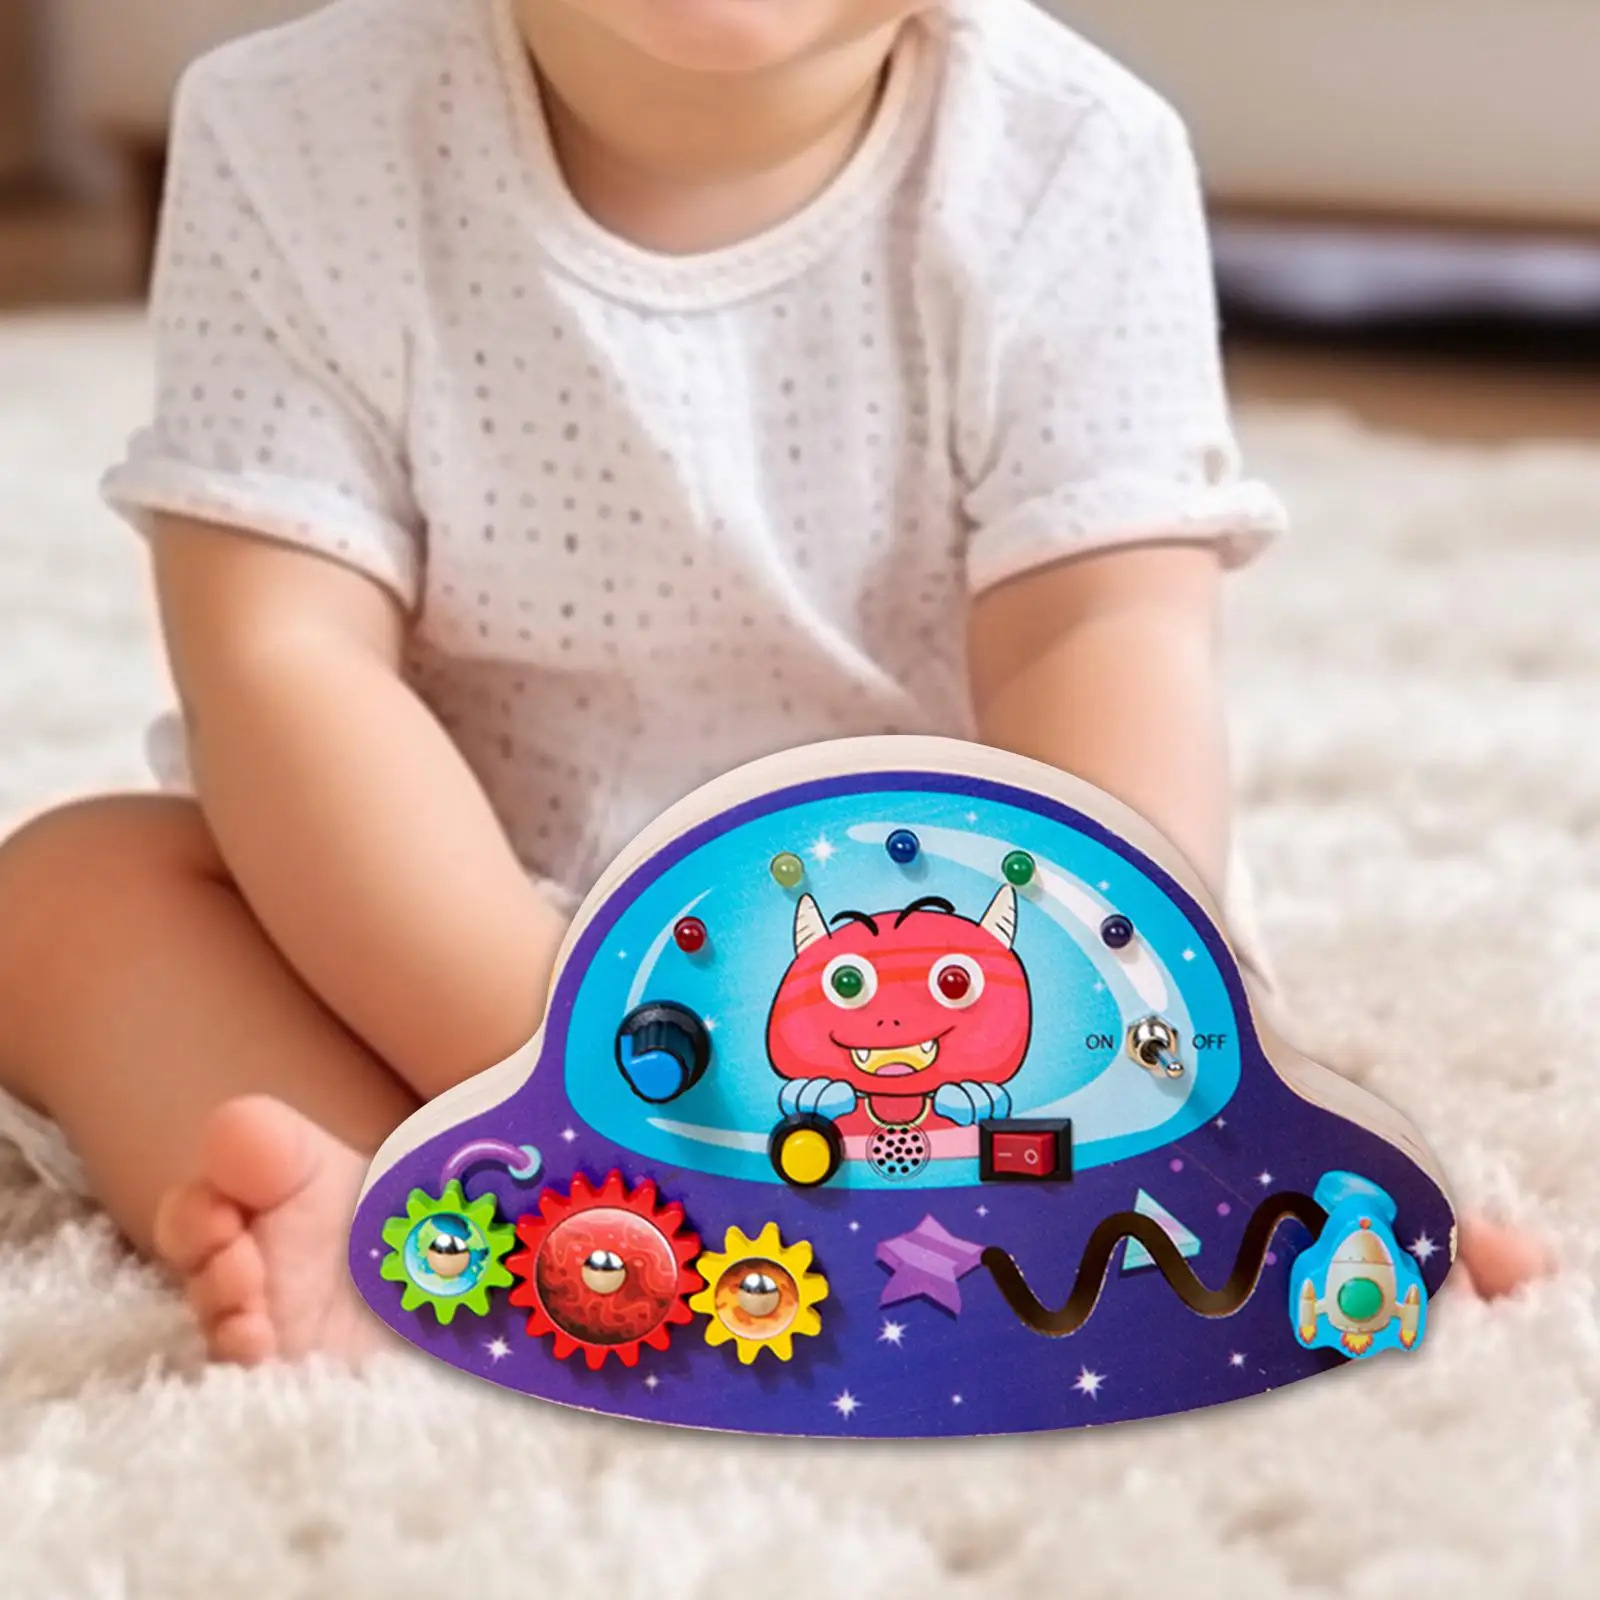 

Wooden Busy Board with LED Light Travel Toy Fine Motor Skills Development Wooden Sensory Toy for Kids Preschool Gifts Boys Girls